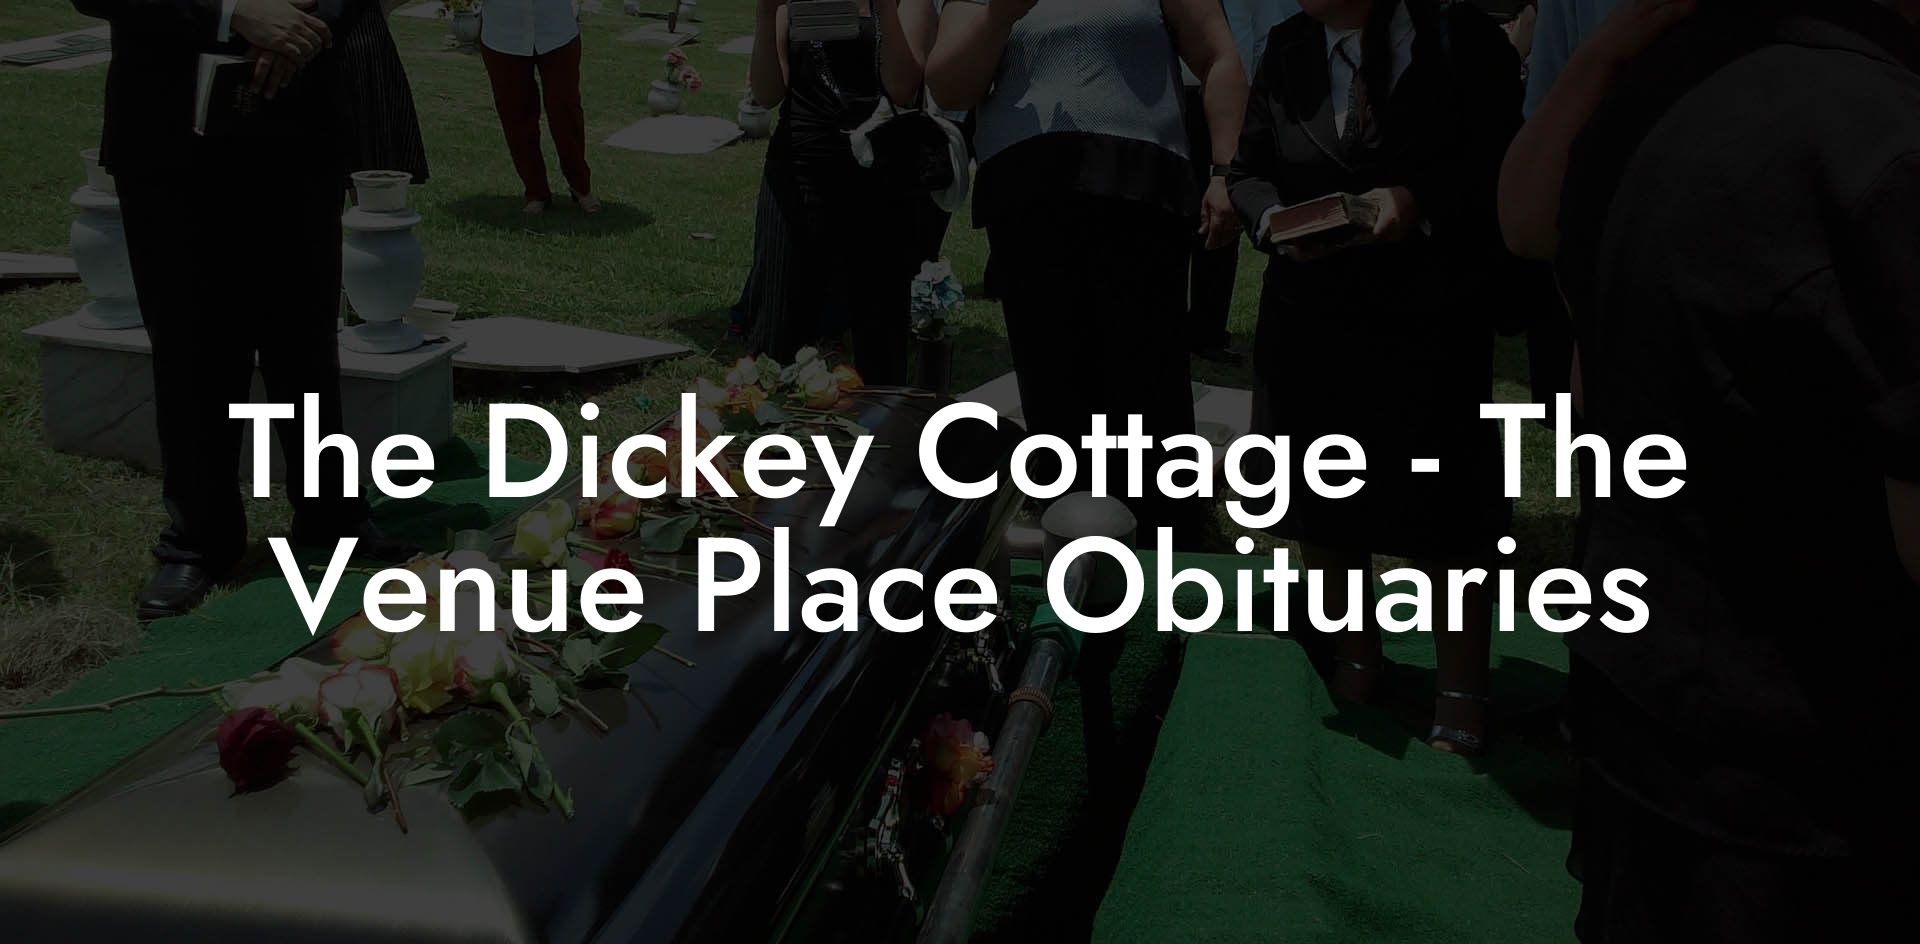 The Dickey Cottage - The Venue Place Obituaries